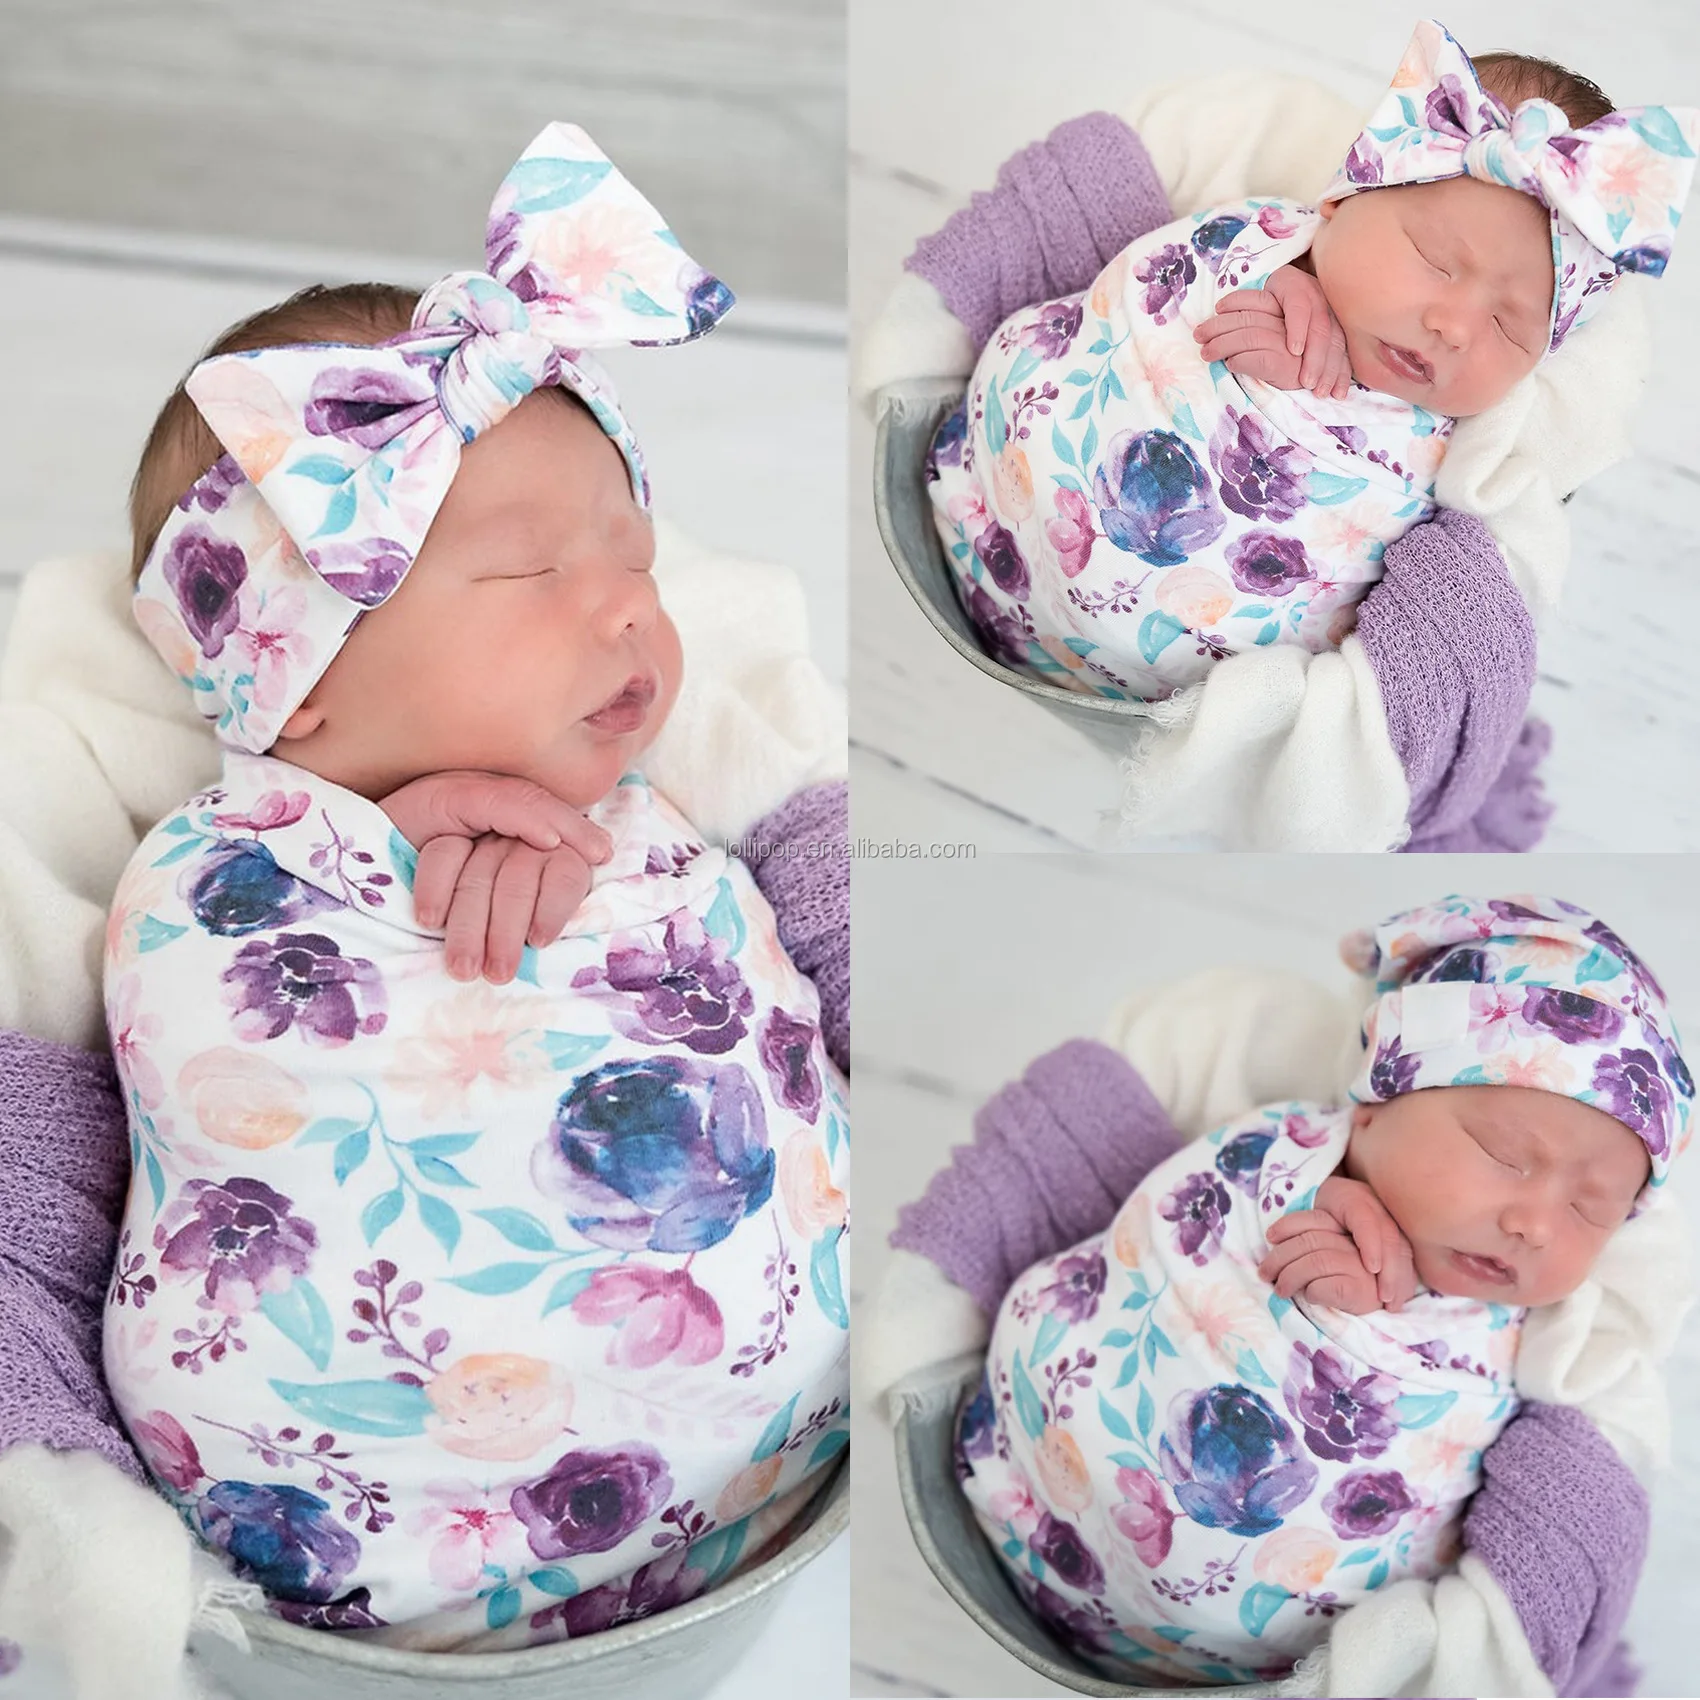 Newborn Cute Receiving Blankets for Boy Girl 0-3 Months BBcolor-13-1 